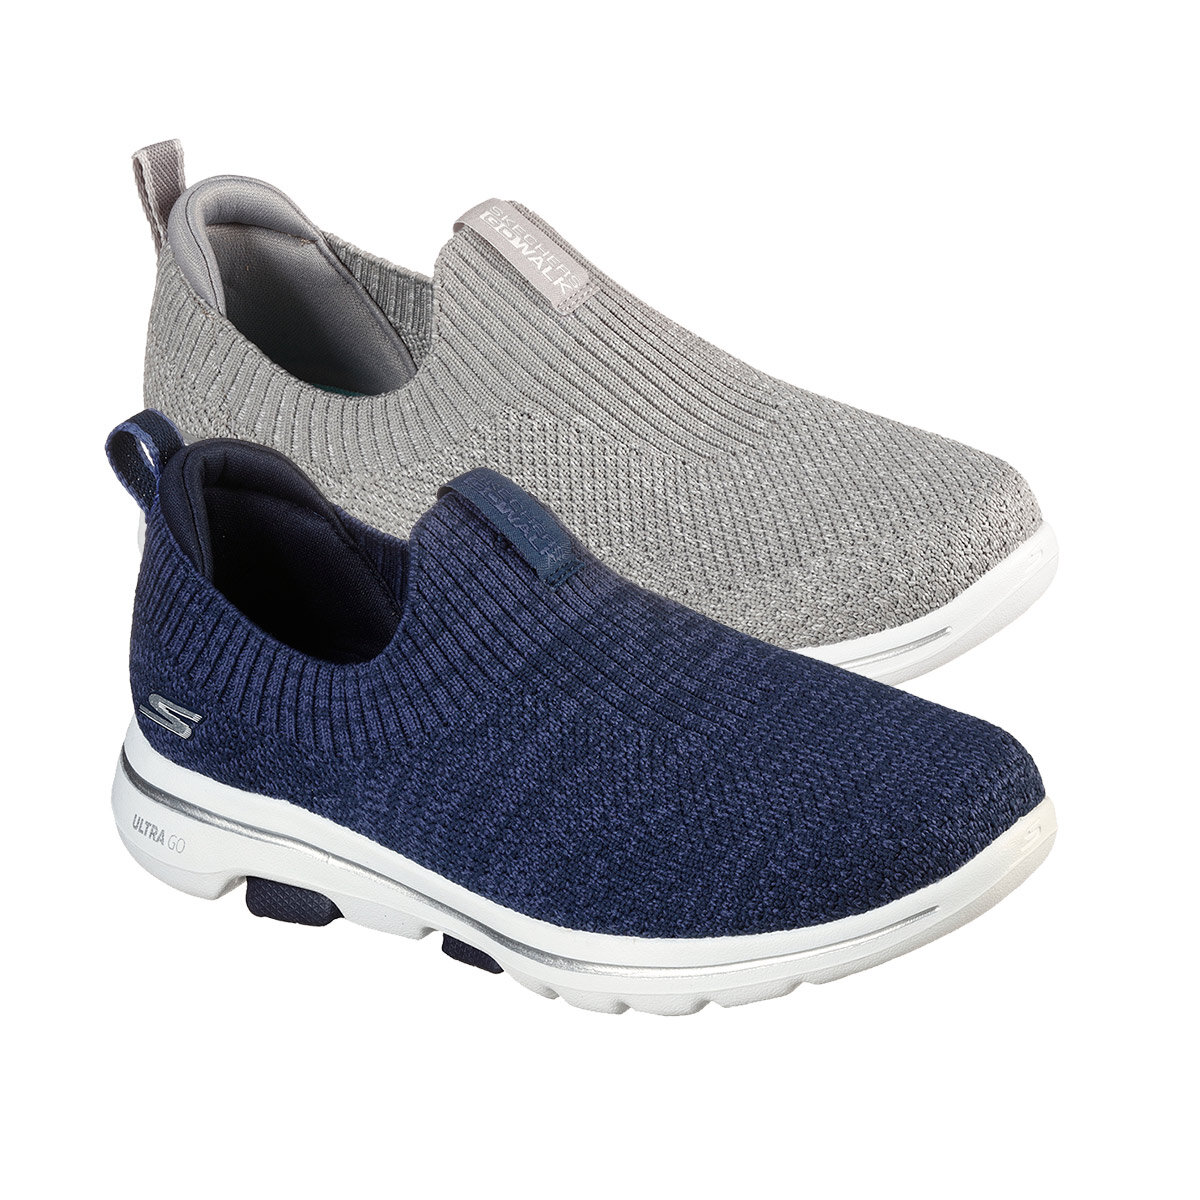 Skechers Ladies GO Walk Arch Fit Iconic Slip-On | vlr.eng.br